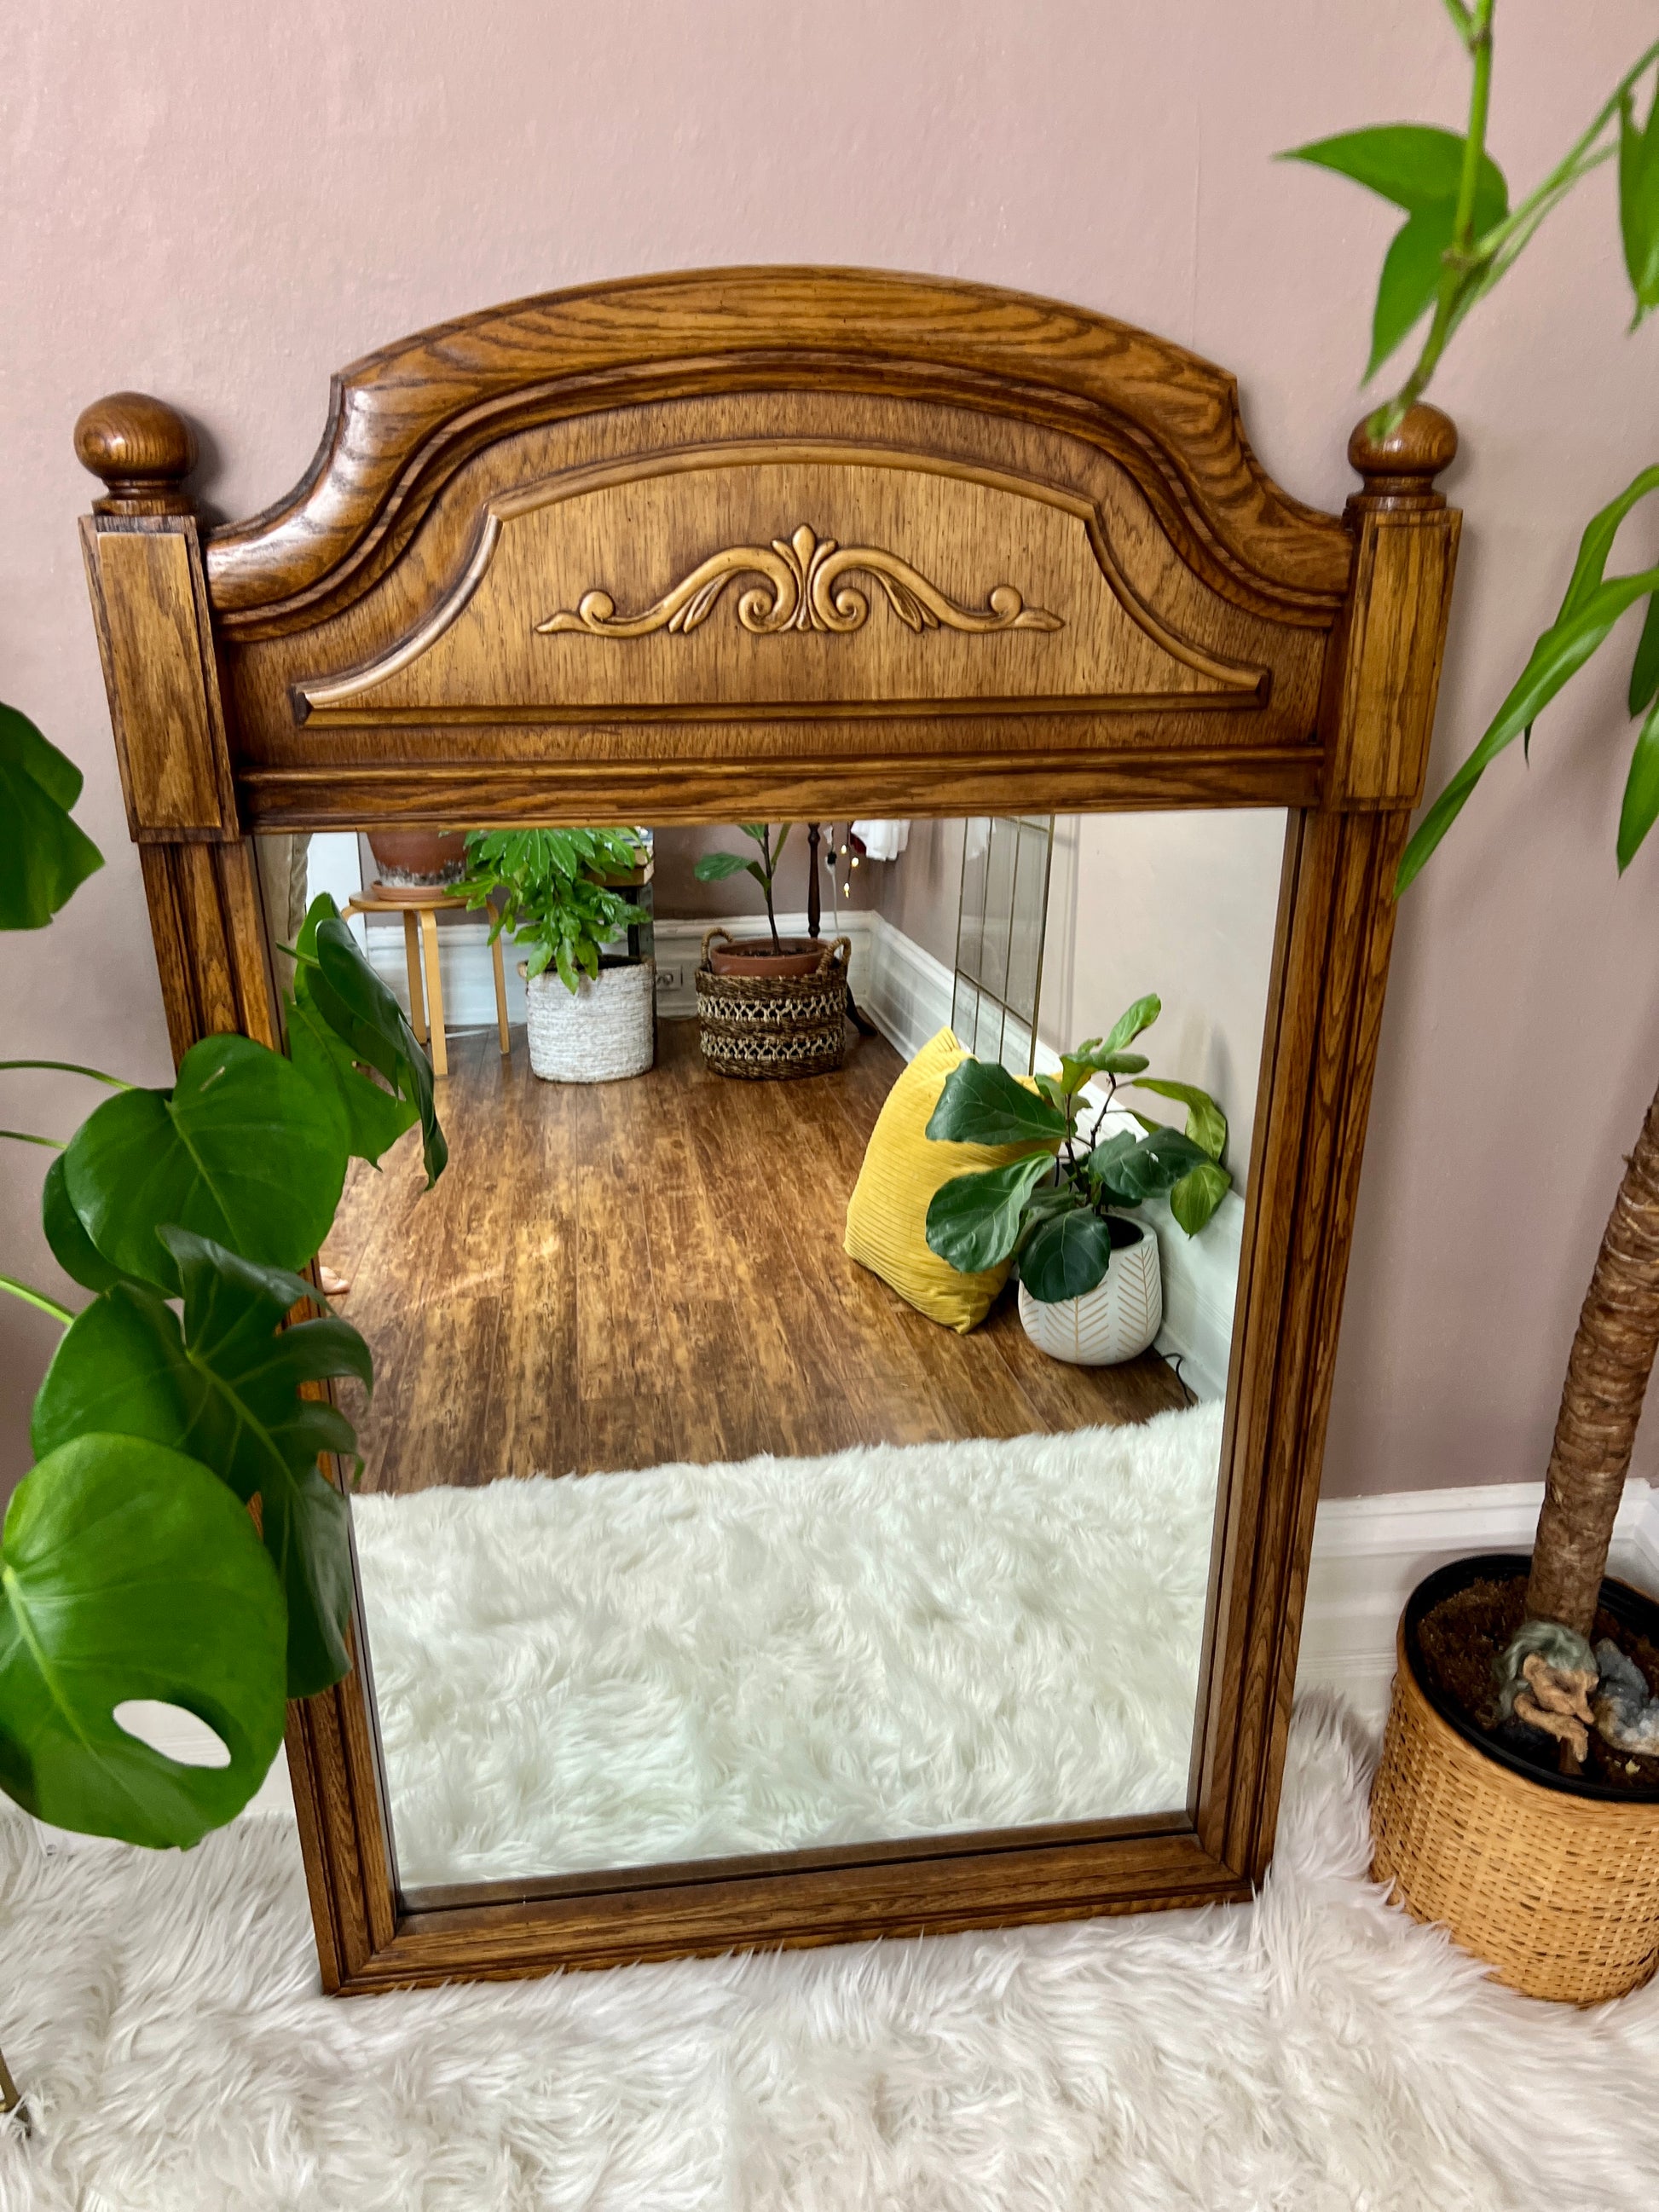 This is a vintage solid oak mirror